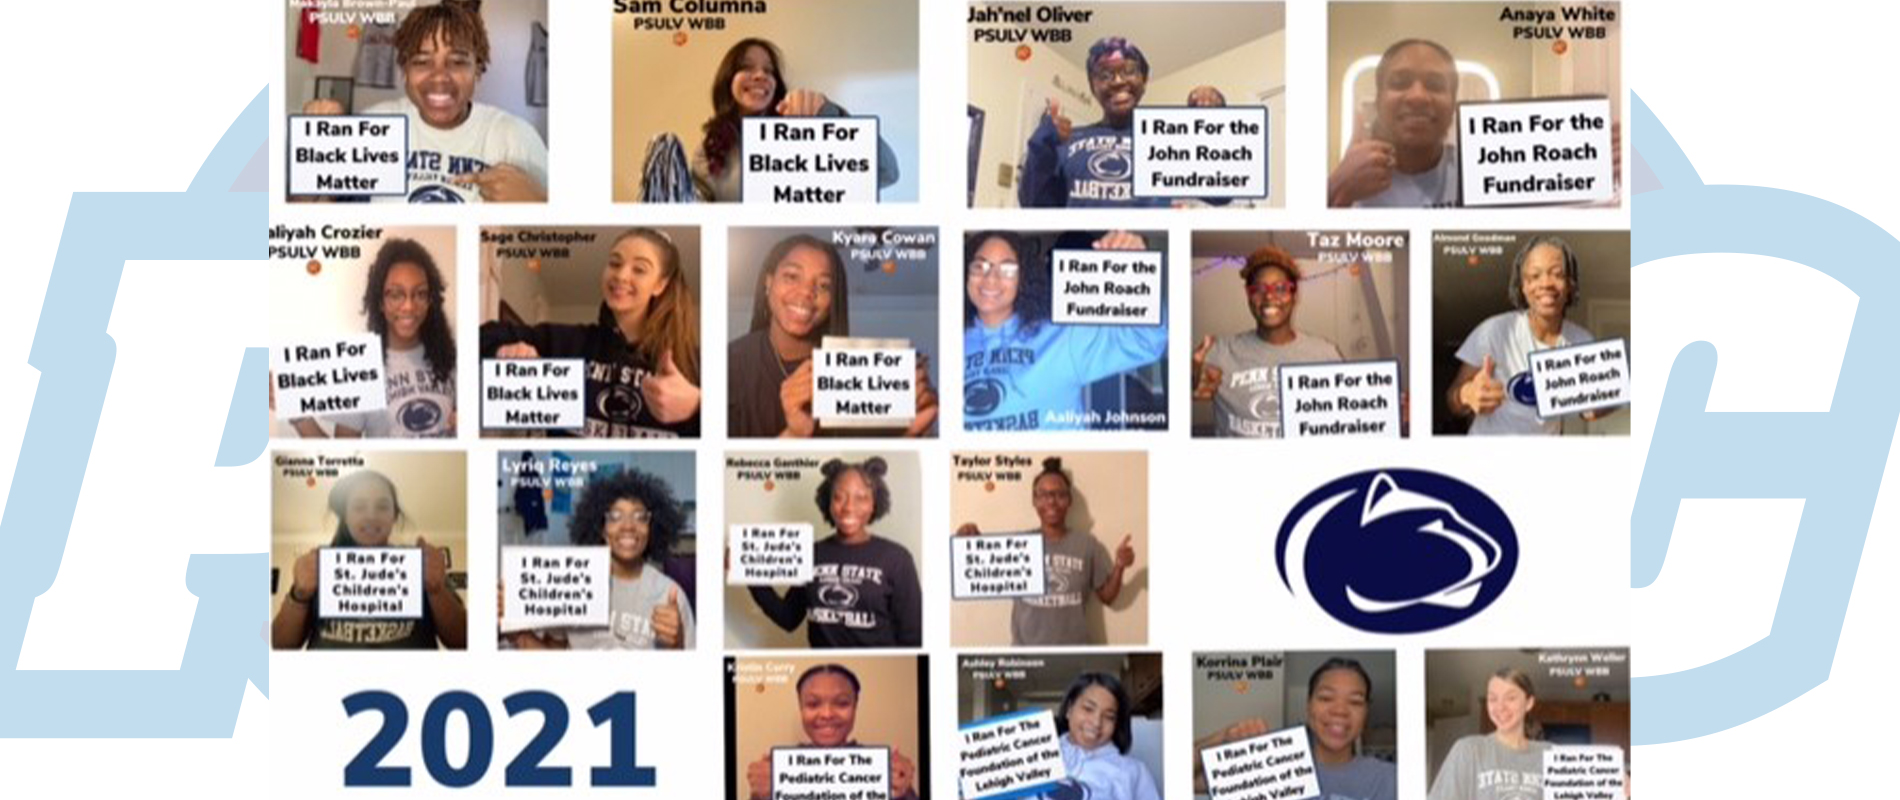 Penn State Lehigh Valley women's basketball players hold up signs to show what charity causes they ran for during their most recent fundraising effort.